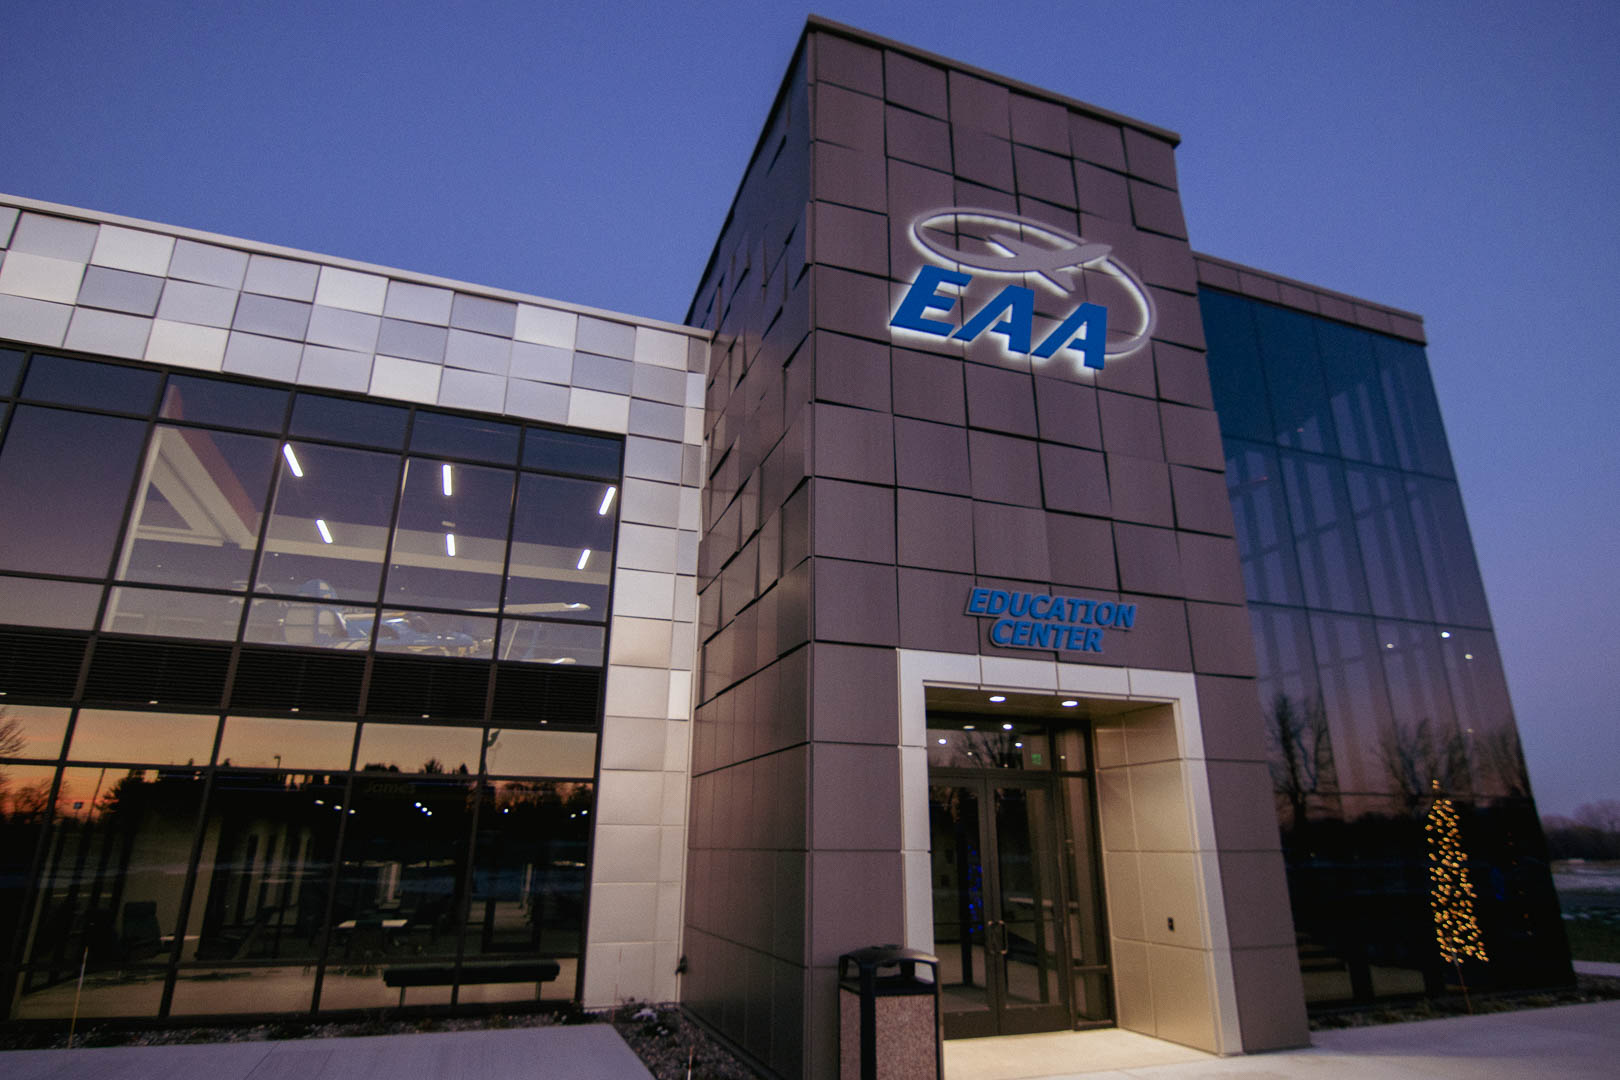 The front entrance of the Experimental Aircraft Association's (EAA) new education facility at dusk.